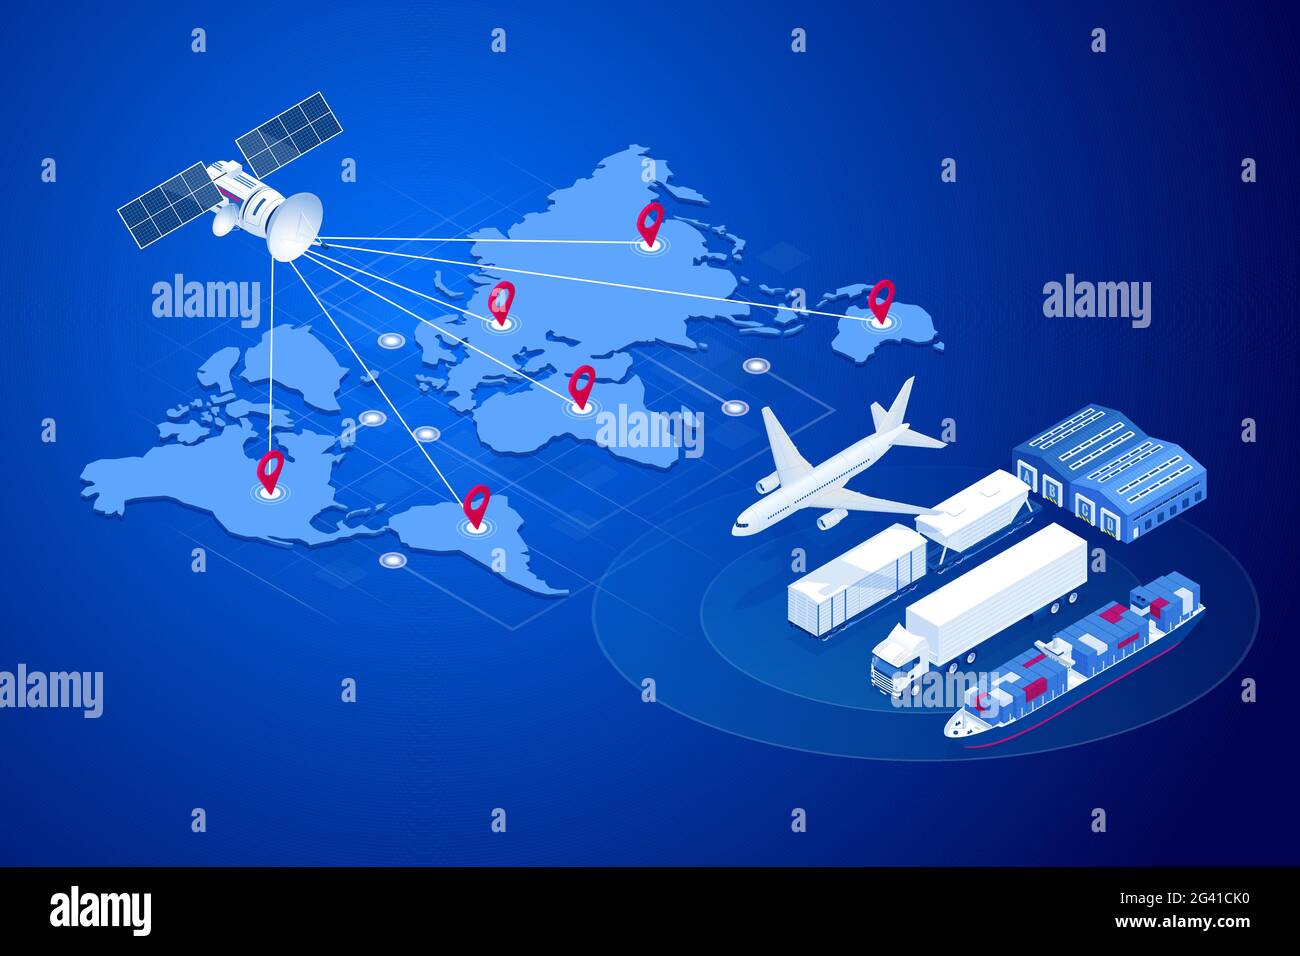 Isometric Global logistics network concept. Freight shipping. Satellite tracks the movement of freight transport. Maritime, air shipping transport Stock Vector